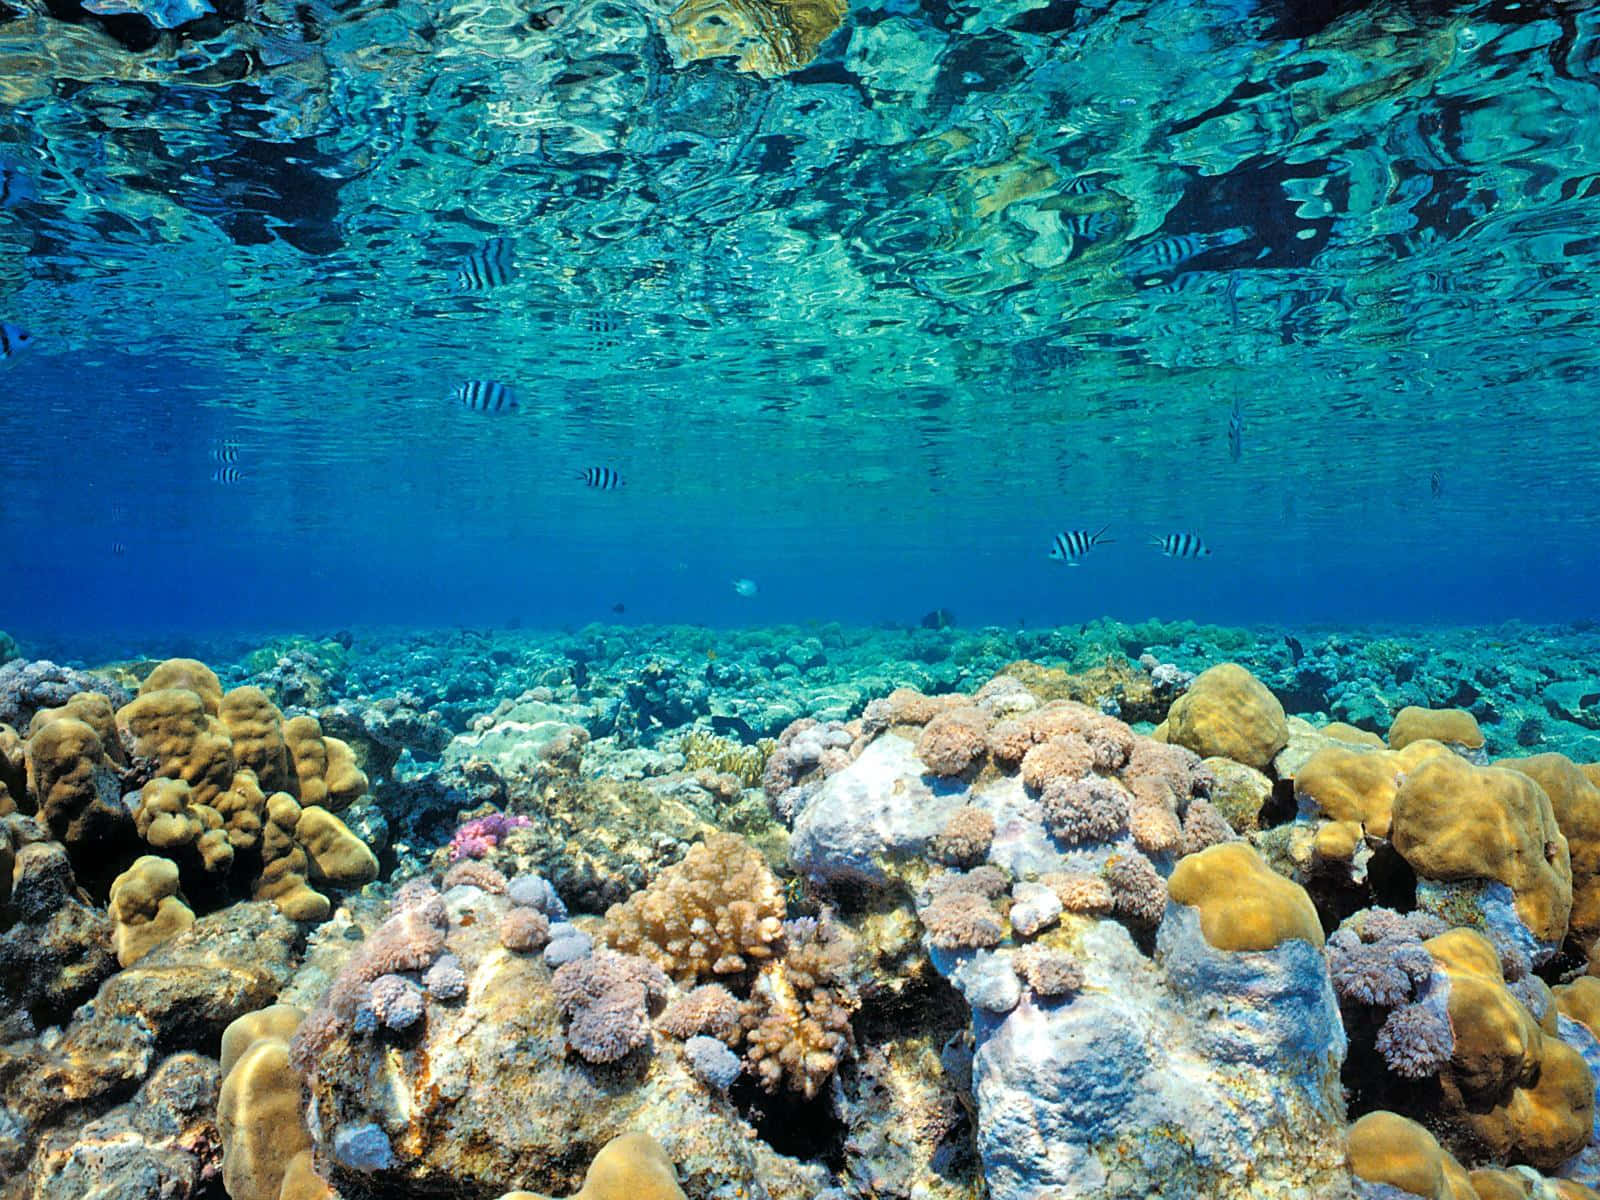 Underwater Beauty: A Vibrant Coral Reef